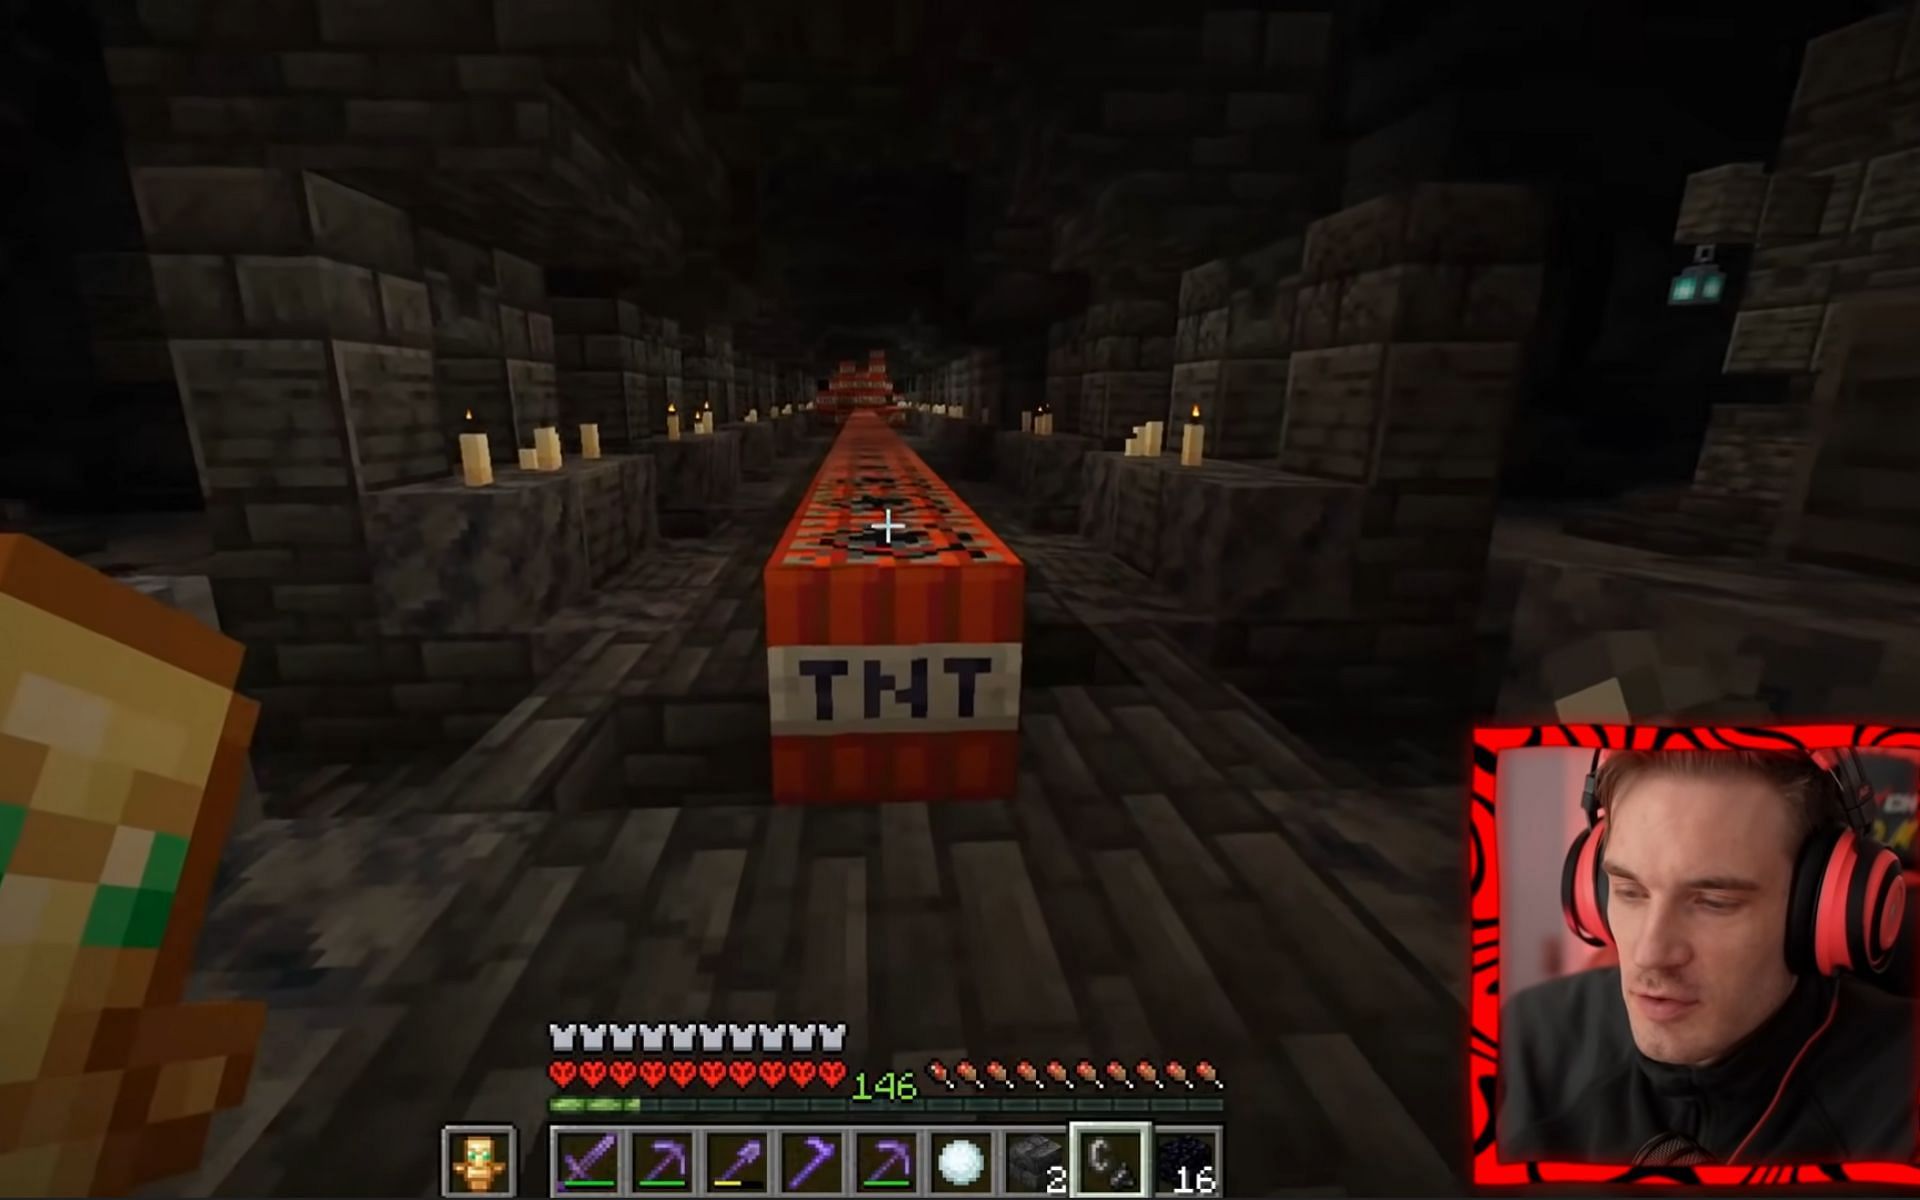 Blowing up an Ancient City with TNT (Image via PewDiePie YouTube)